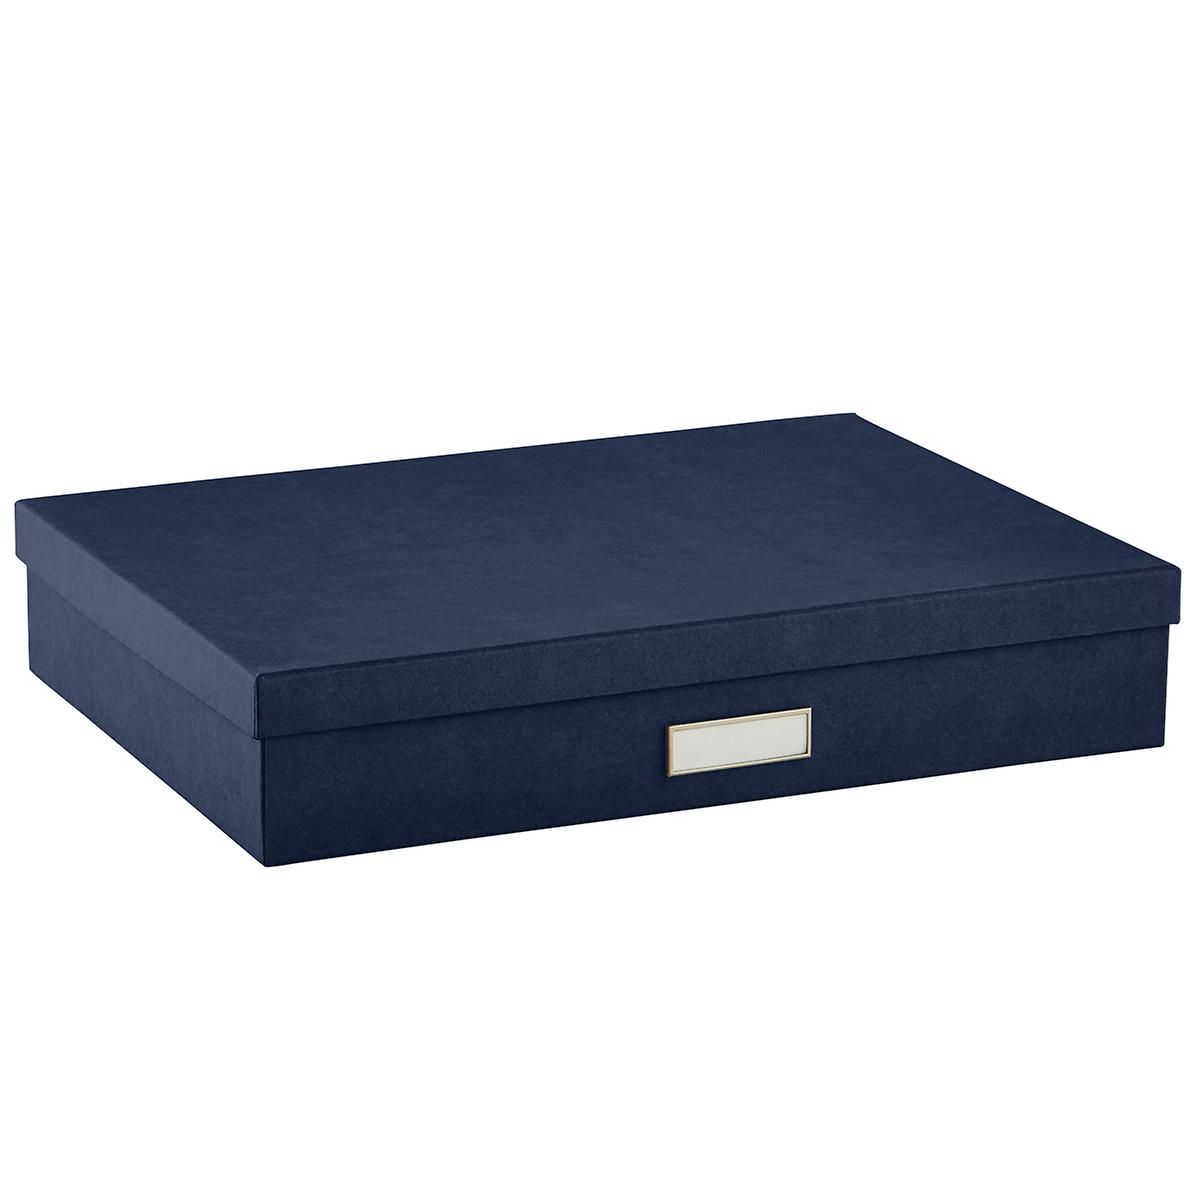 Bigso Navy Stockholm Office Storage Boxes | The Container Store